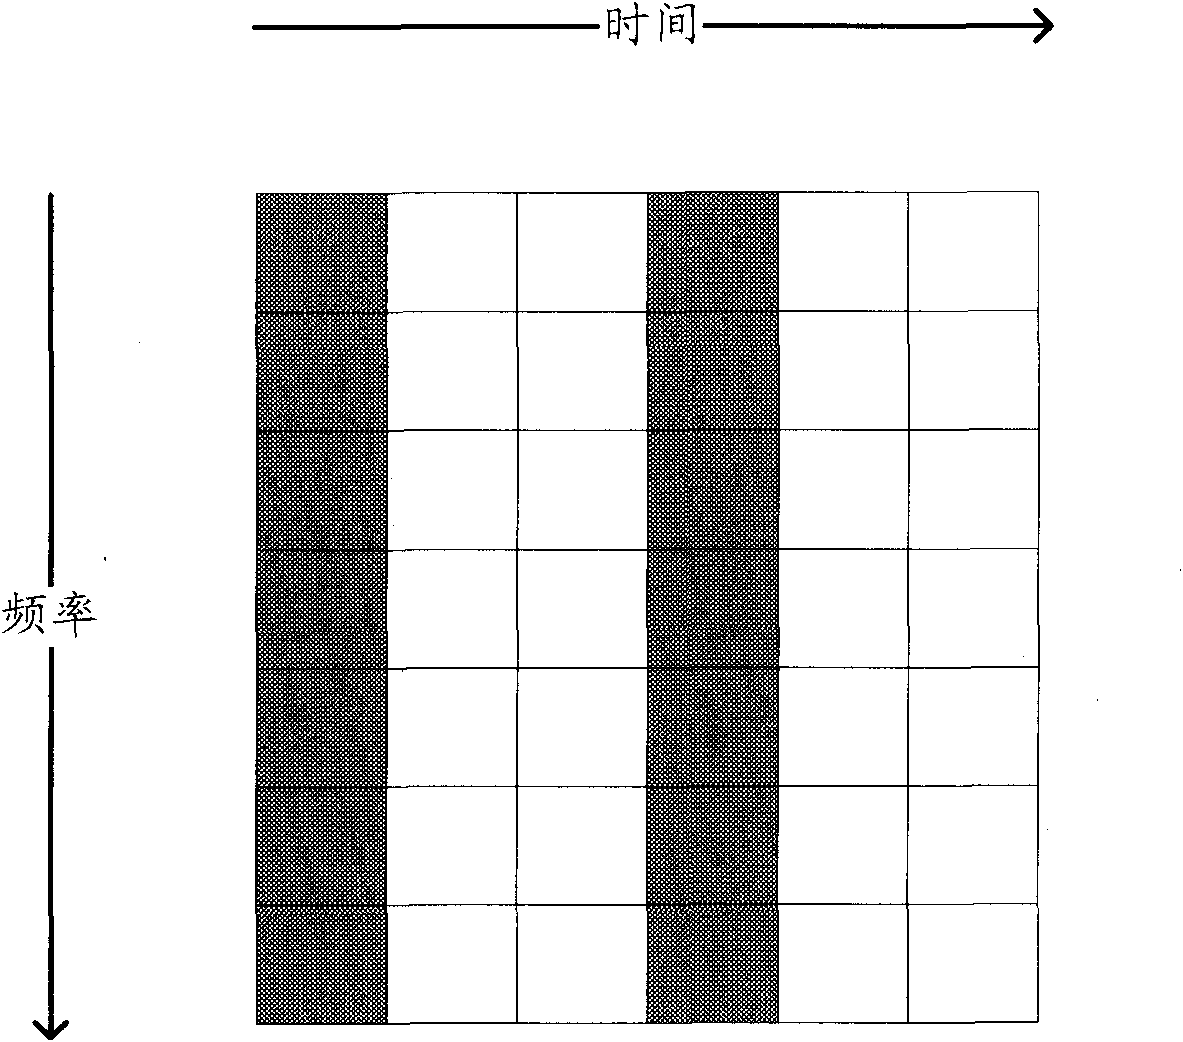 Channel estimation method and device based on OFDM (Orthogonal Frequency Division Multiplexing)